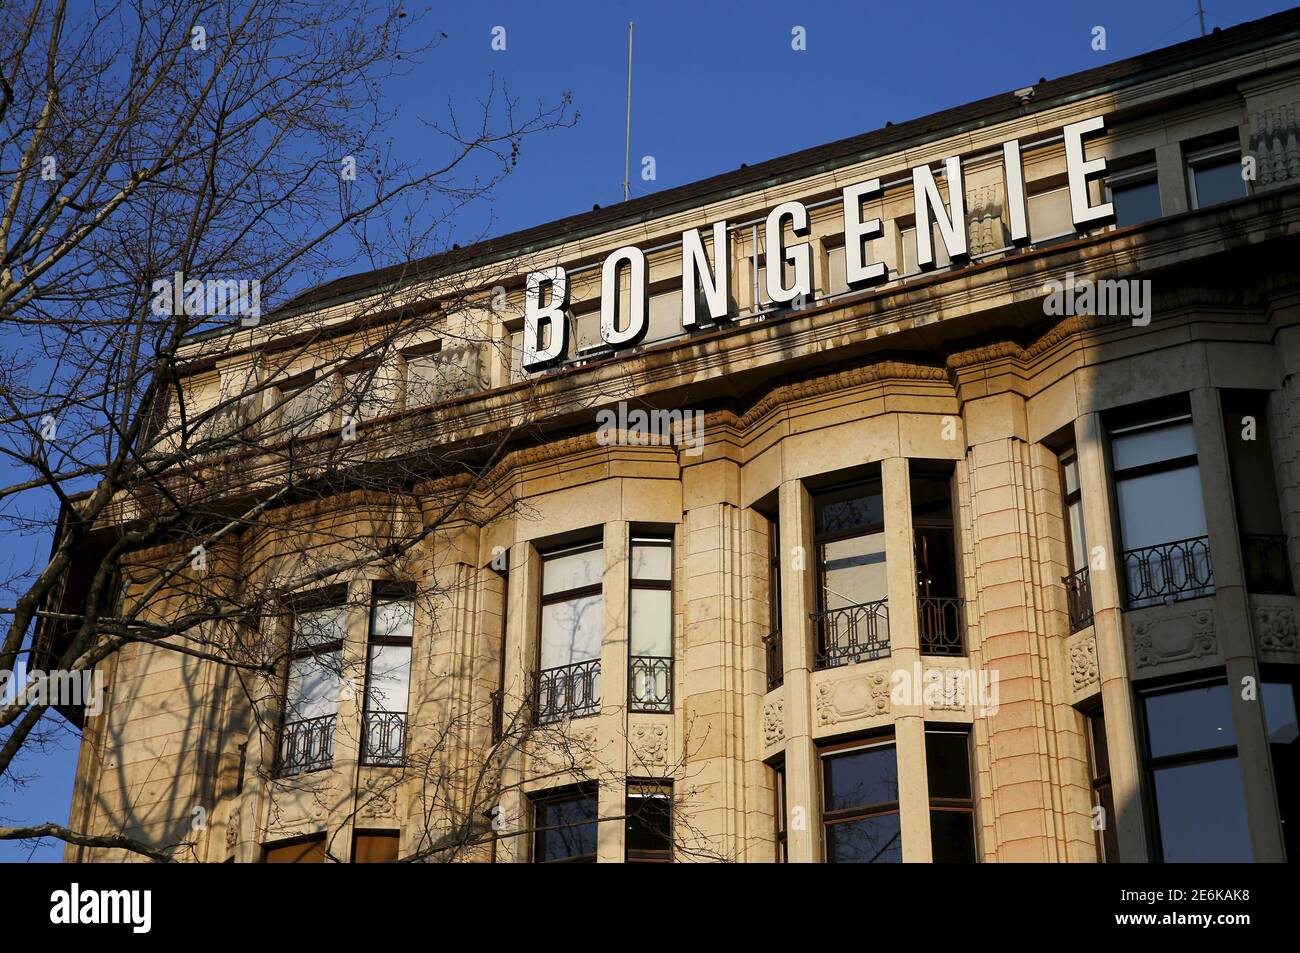 A Bongenie Retail Shop Is Pictured In Lausanne Switzerland March 14 16 For Much Of Its 125 Years Selling Luxury Goods Switzerland S Family Run Emporium Bongenie Grieder Has Been The Kind Of Place